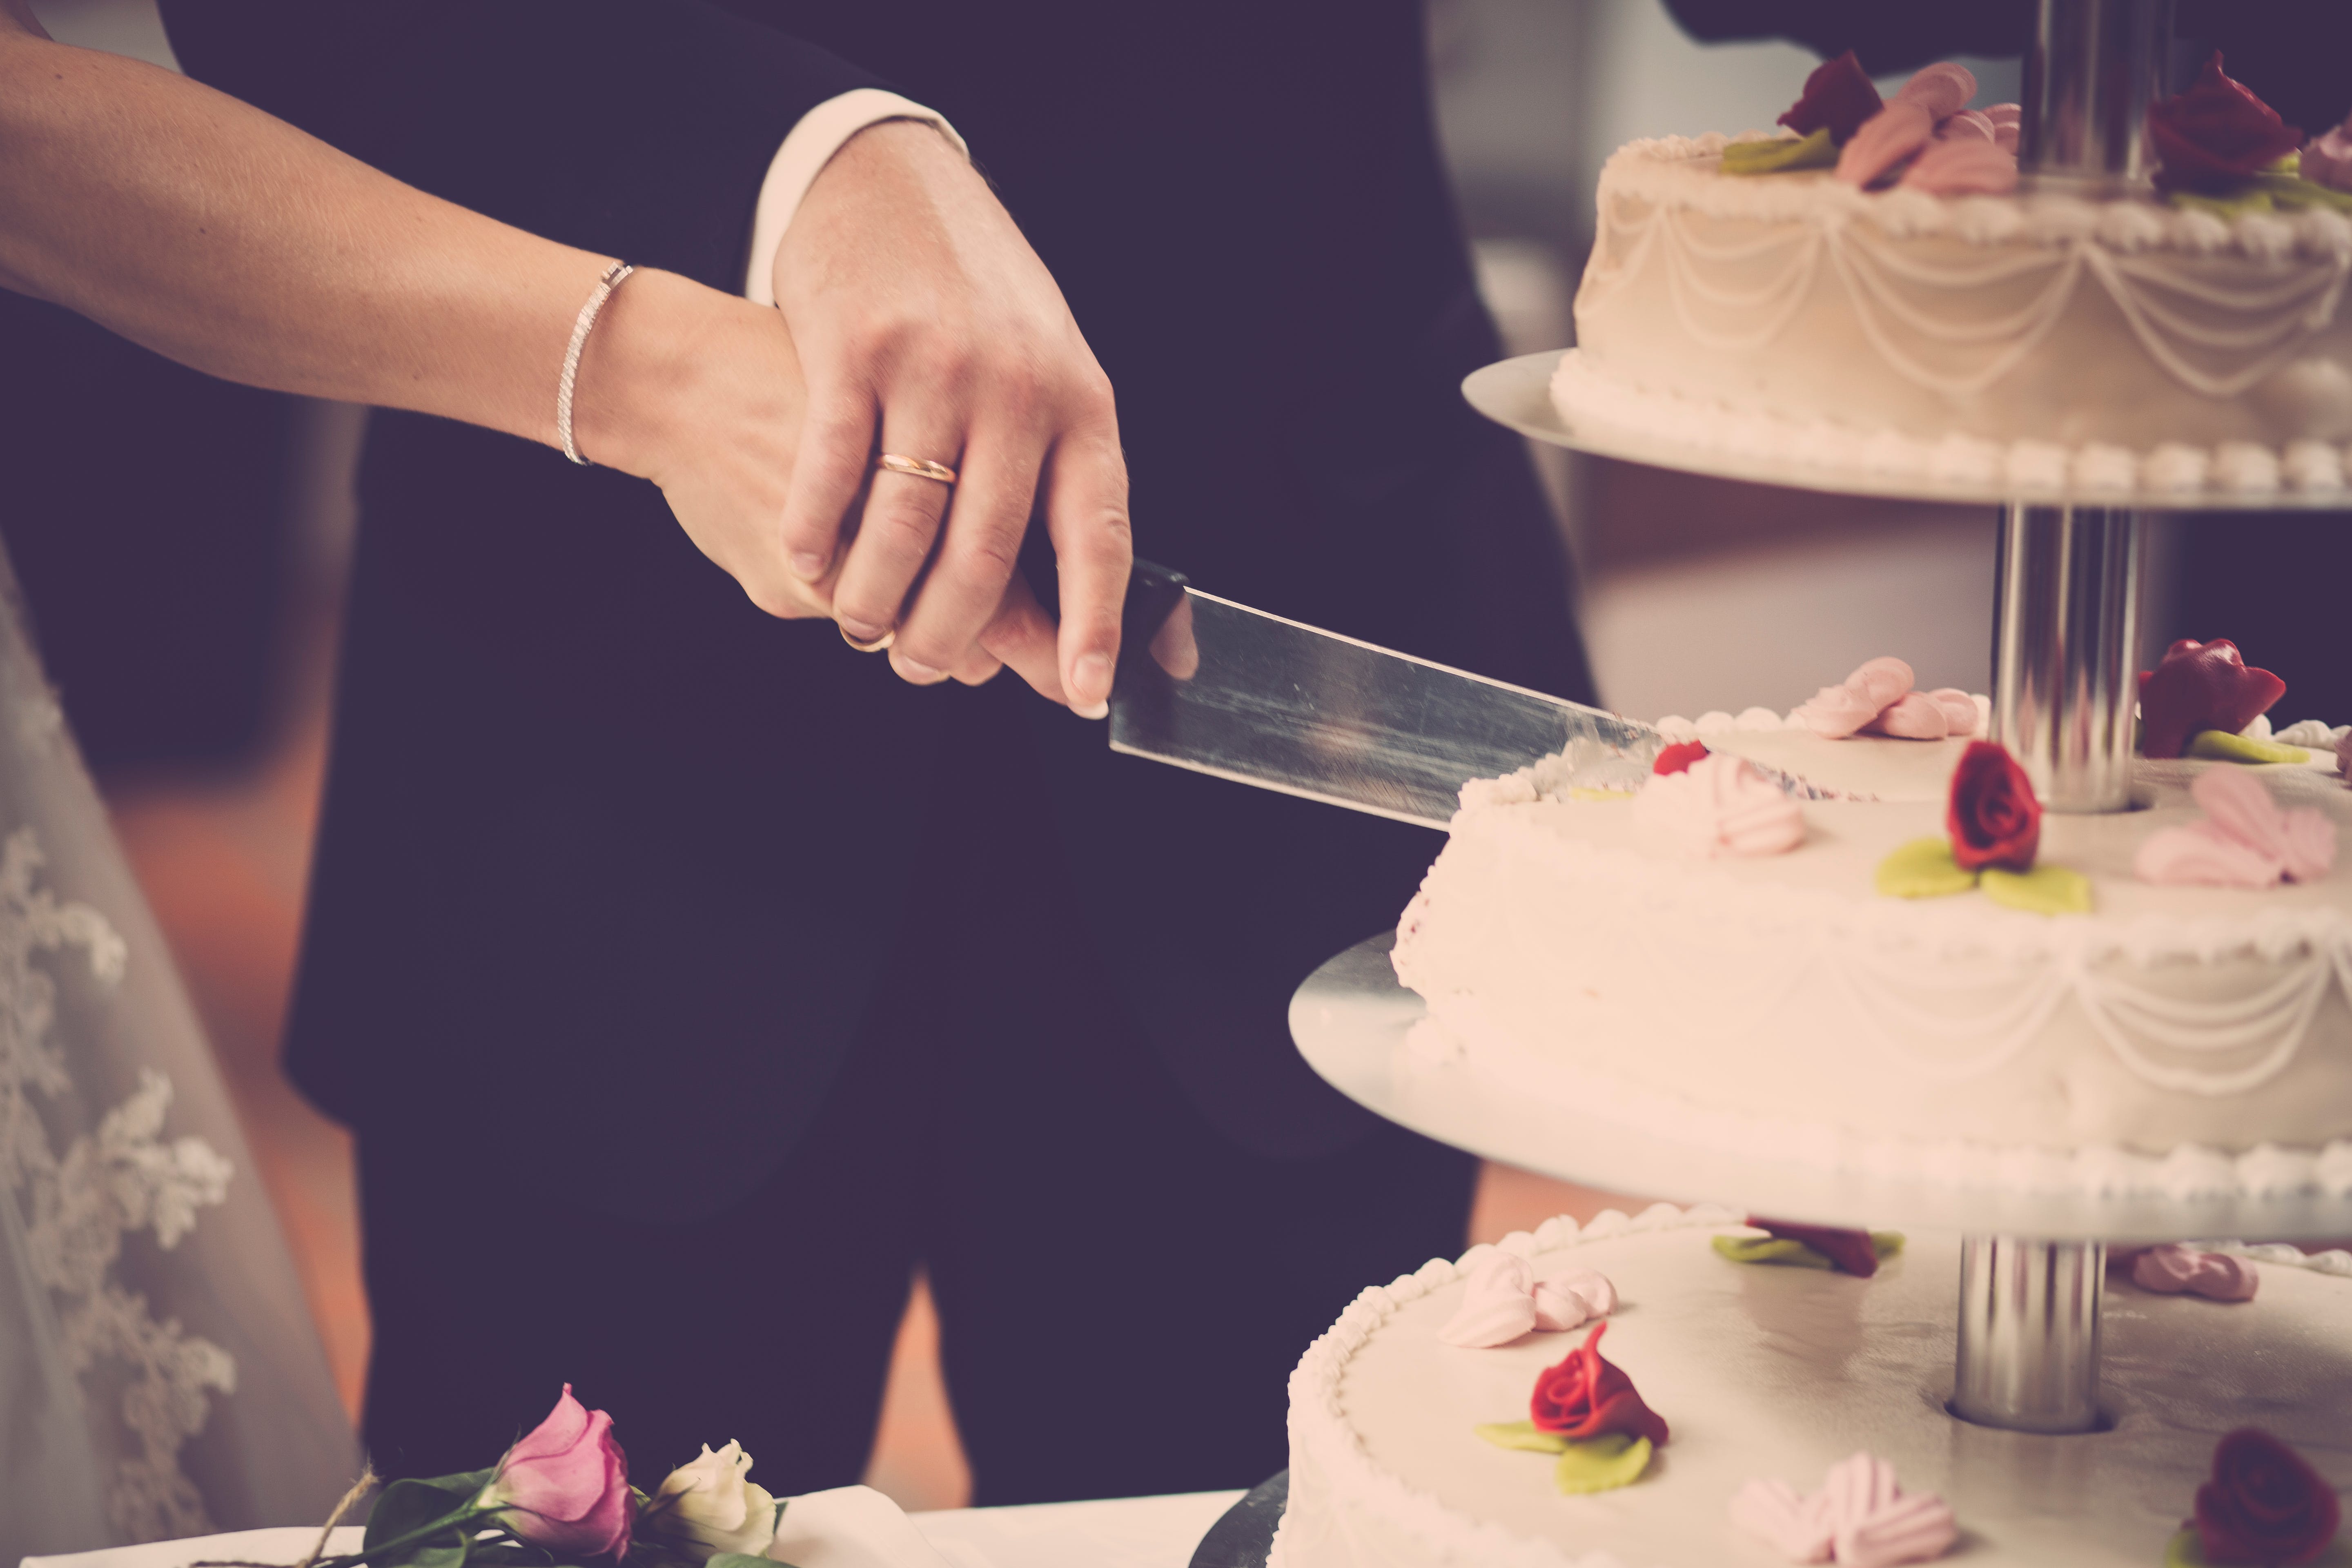 A couple cutting their wedding cake | Source: Pexels